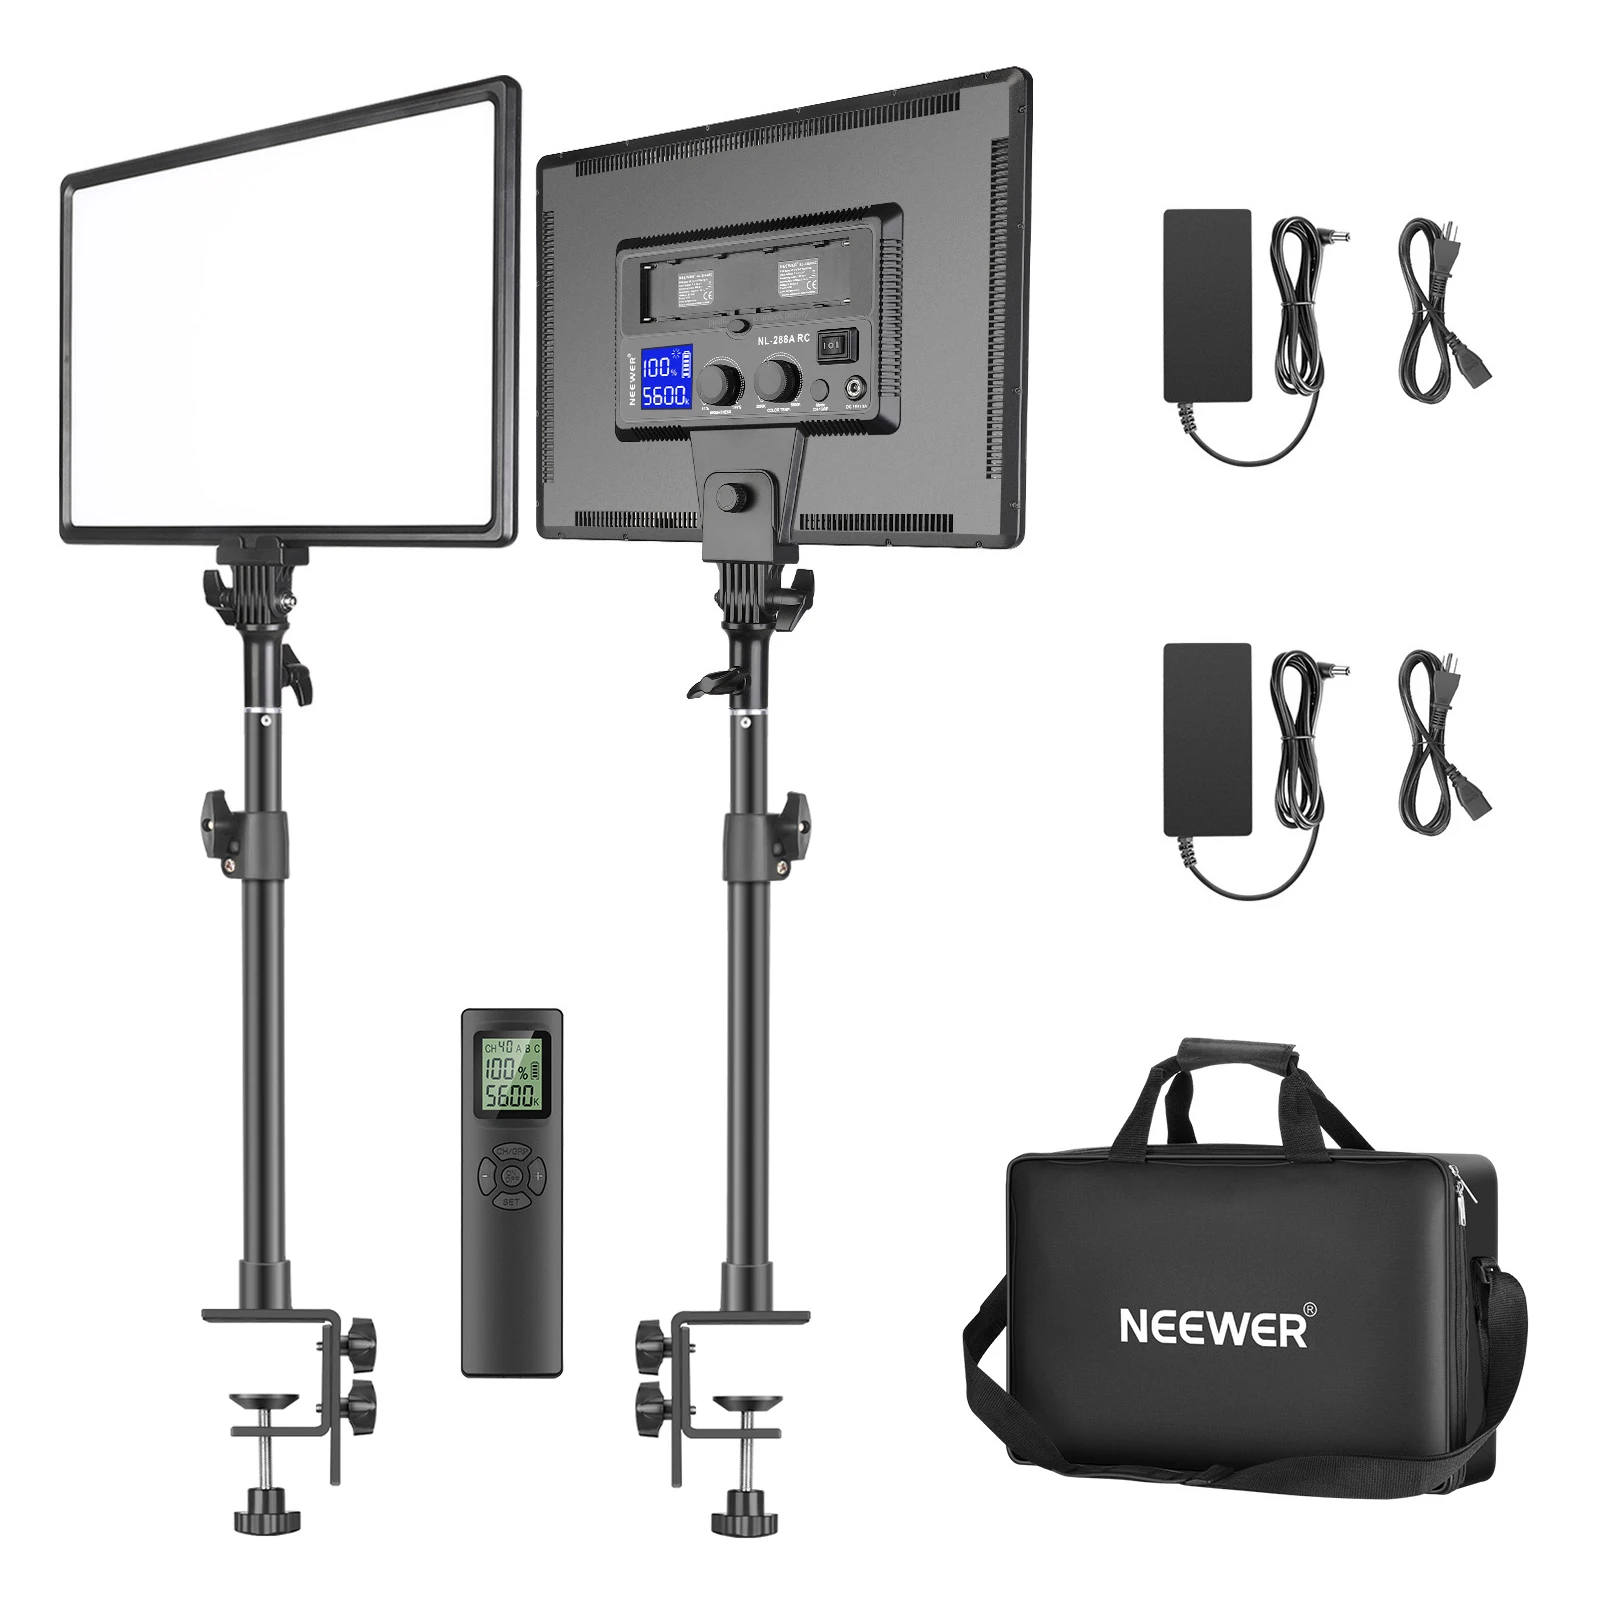 

Neewer 90W Desk Mount LED Video Light C-Clamp Stand Kit with Wireless Remote, Dimmable Bi-Color for Game/YouTube/Live Streaming